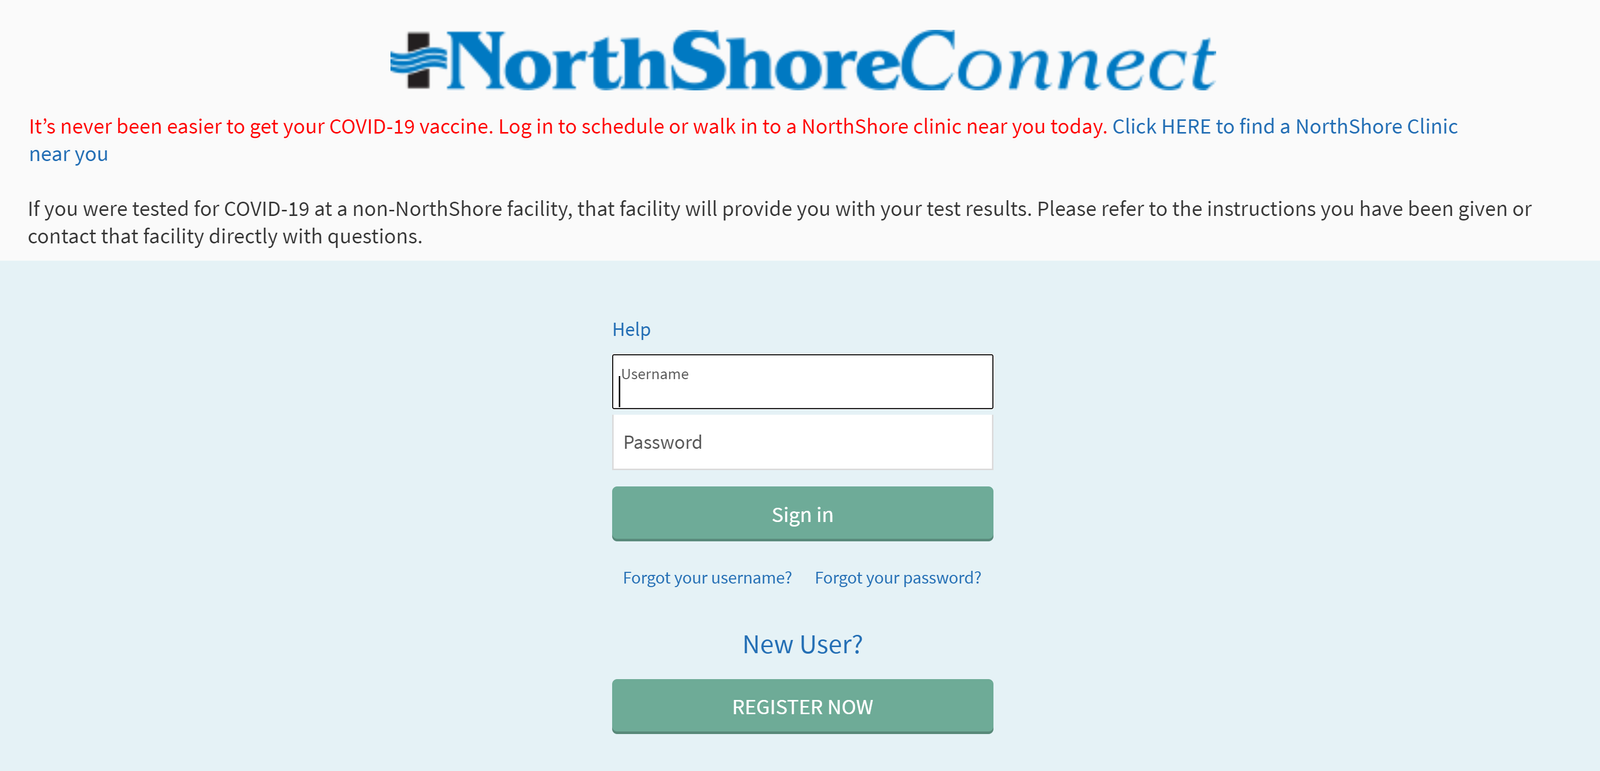 North Shore Connect.Org